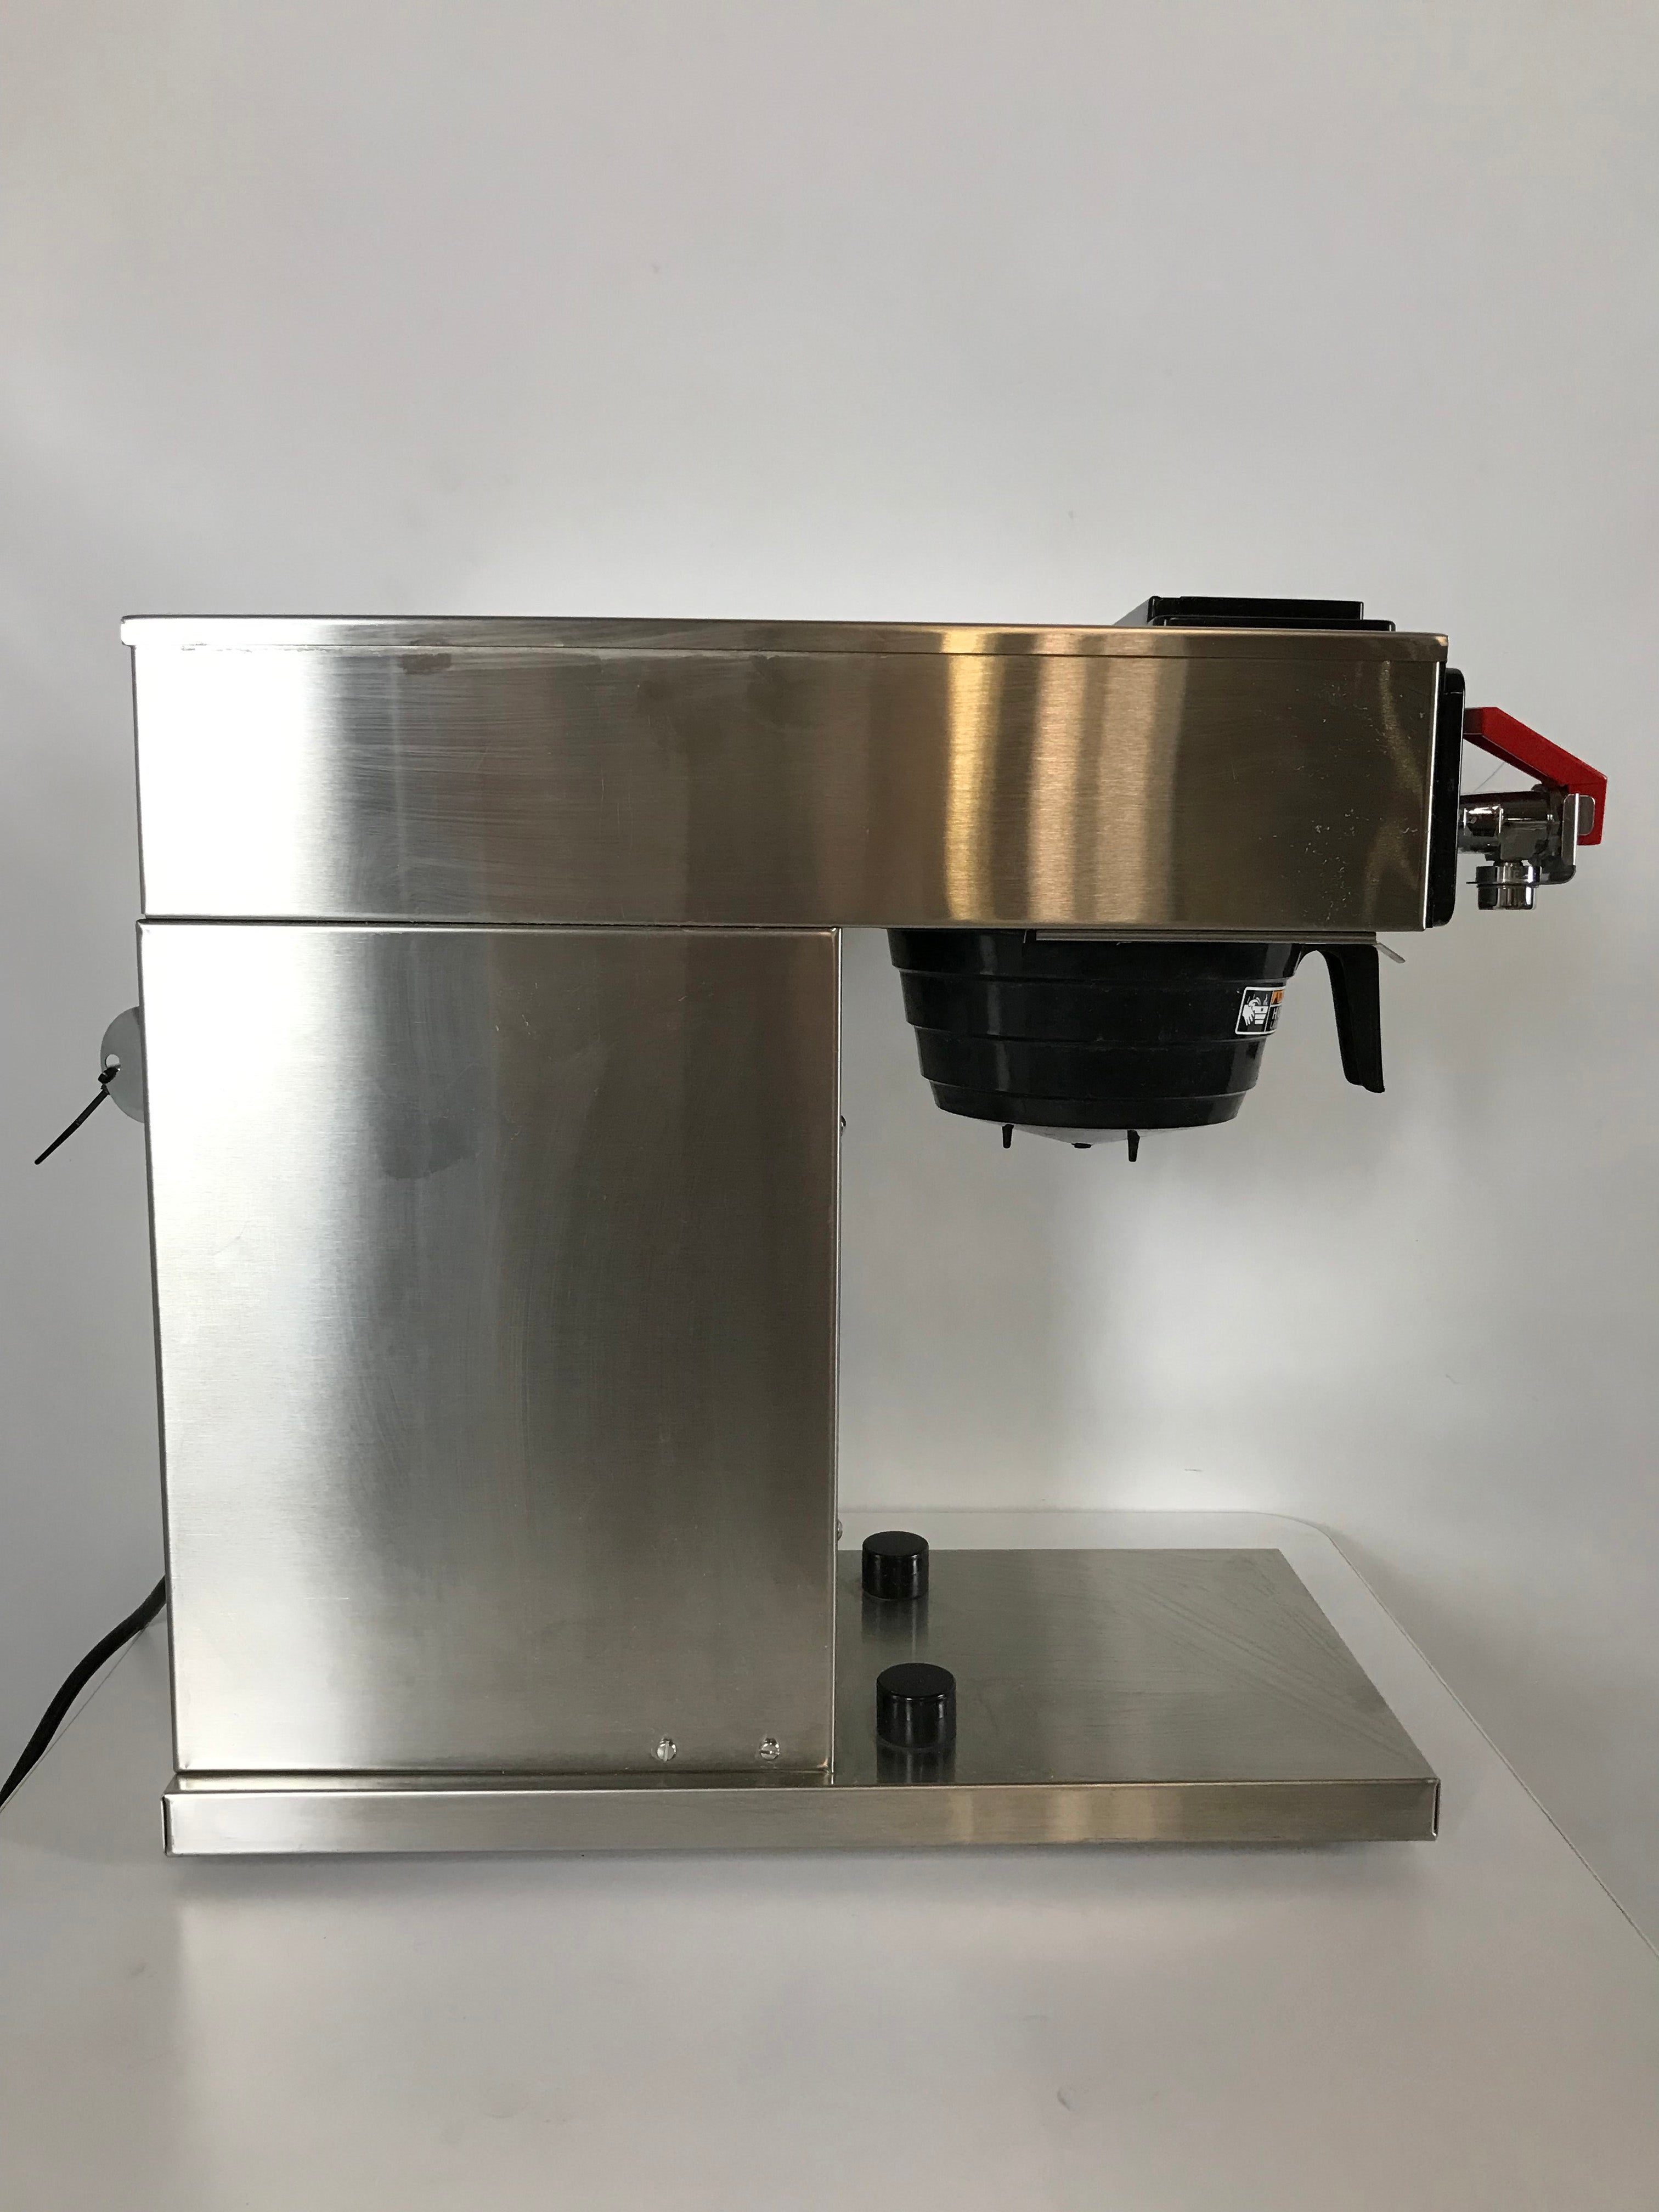 CWTF15-TC Thermal Carafe System - Coffee - BUNN Commercial Site